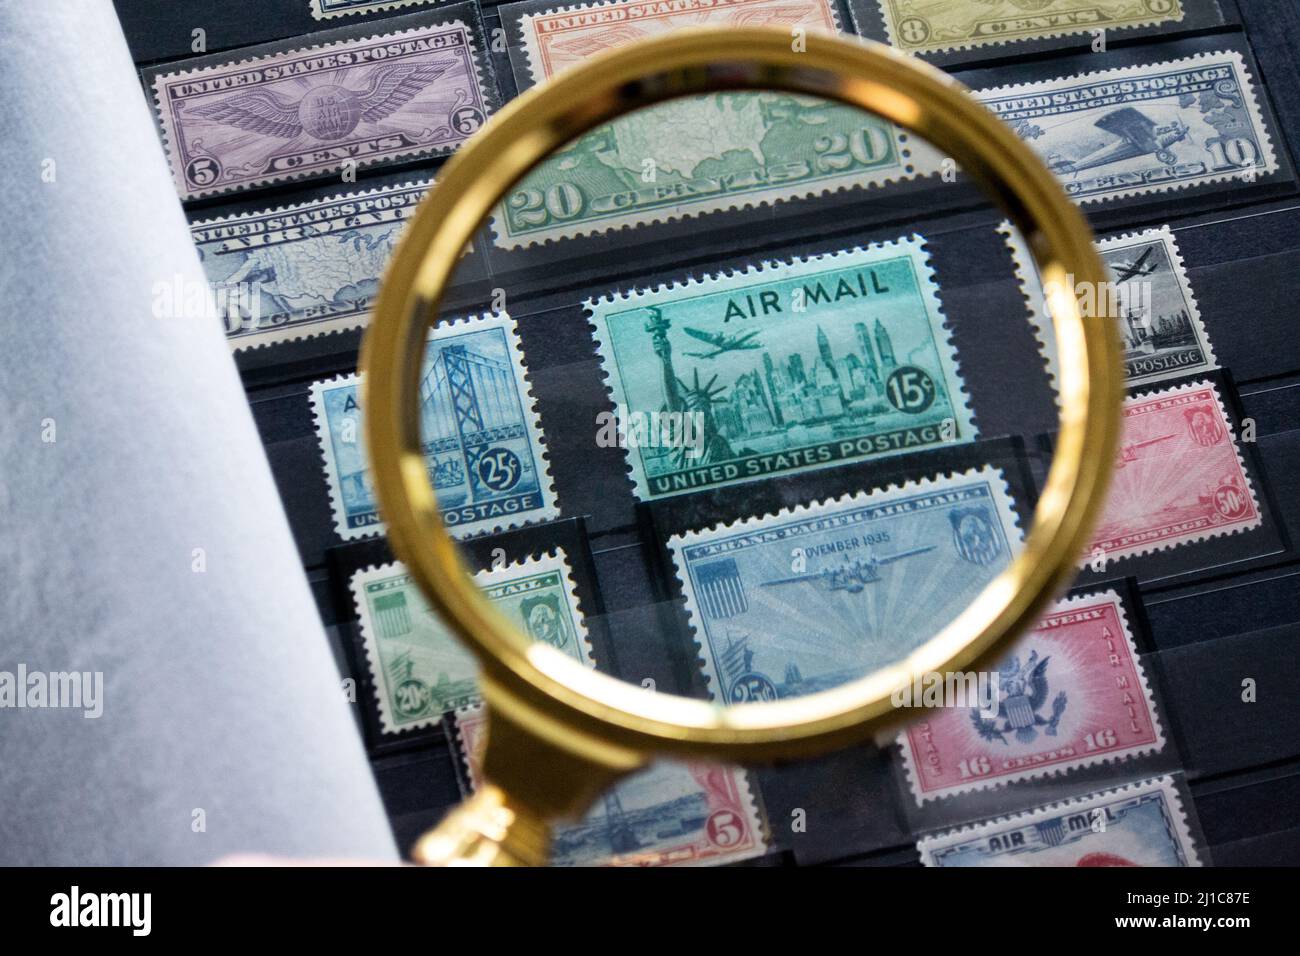 Moscow, Russia, March 2022: Hobbies: collecting and exploring postage stamps. An album with old stamps. Looking at the green stamp with Statue of Libe Stock Photo